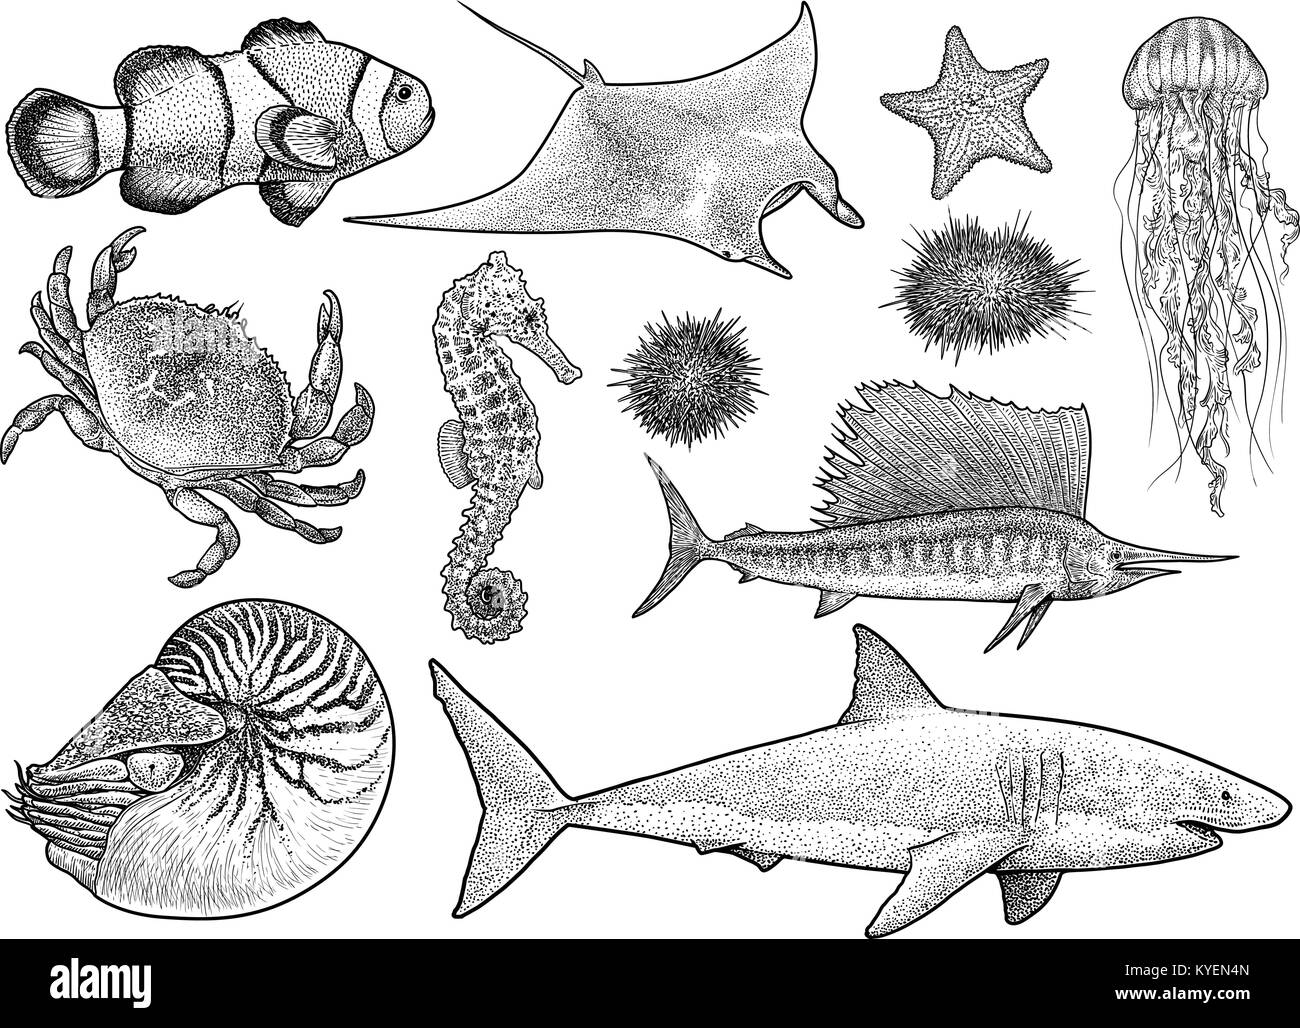 Marine animals collection illustration, drawing, engraving, ink, line art, vector Stock Vector